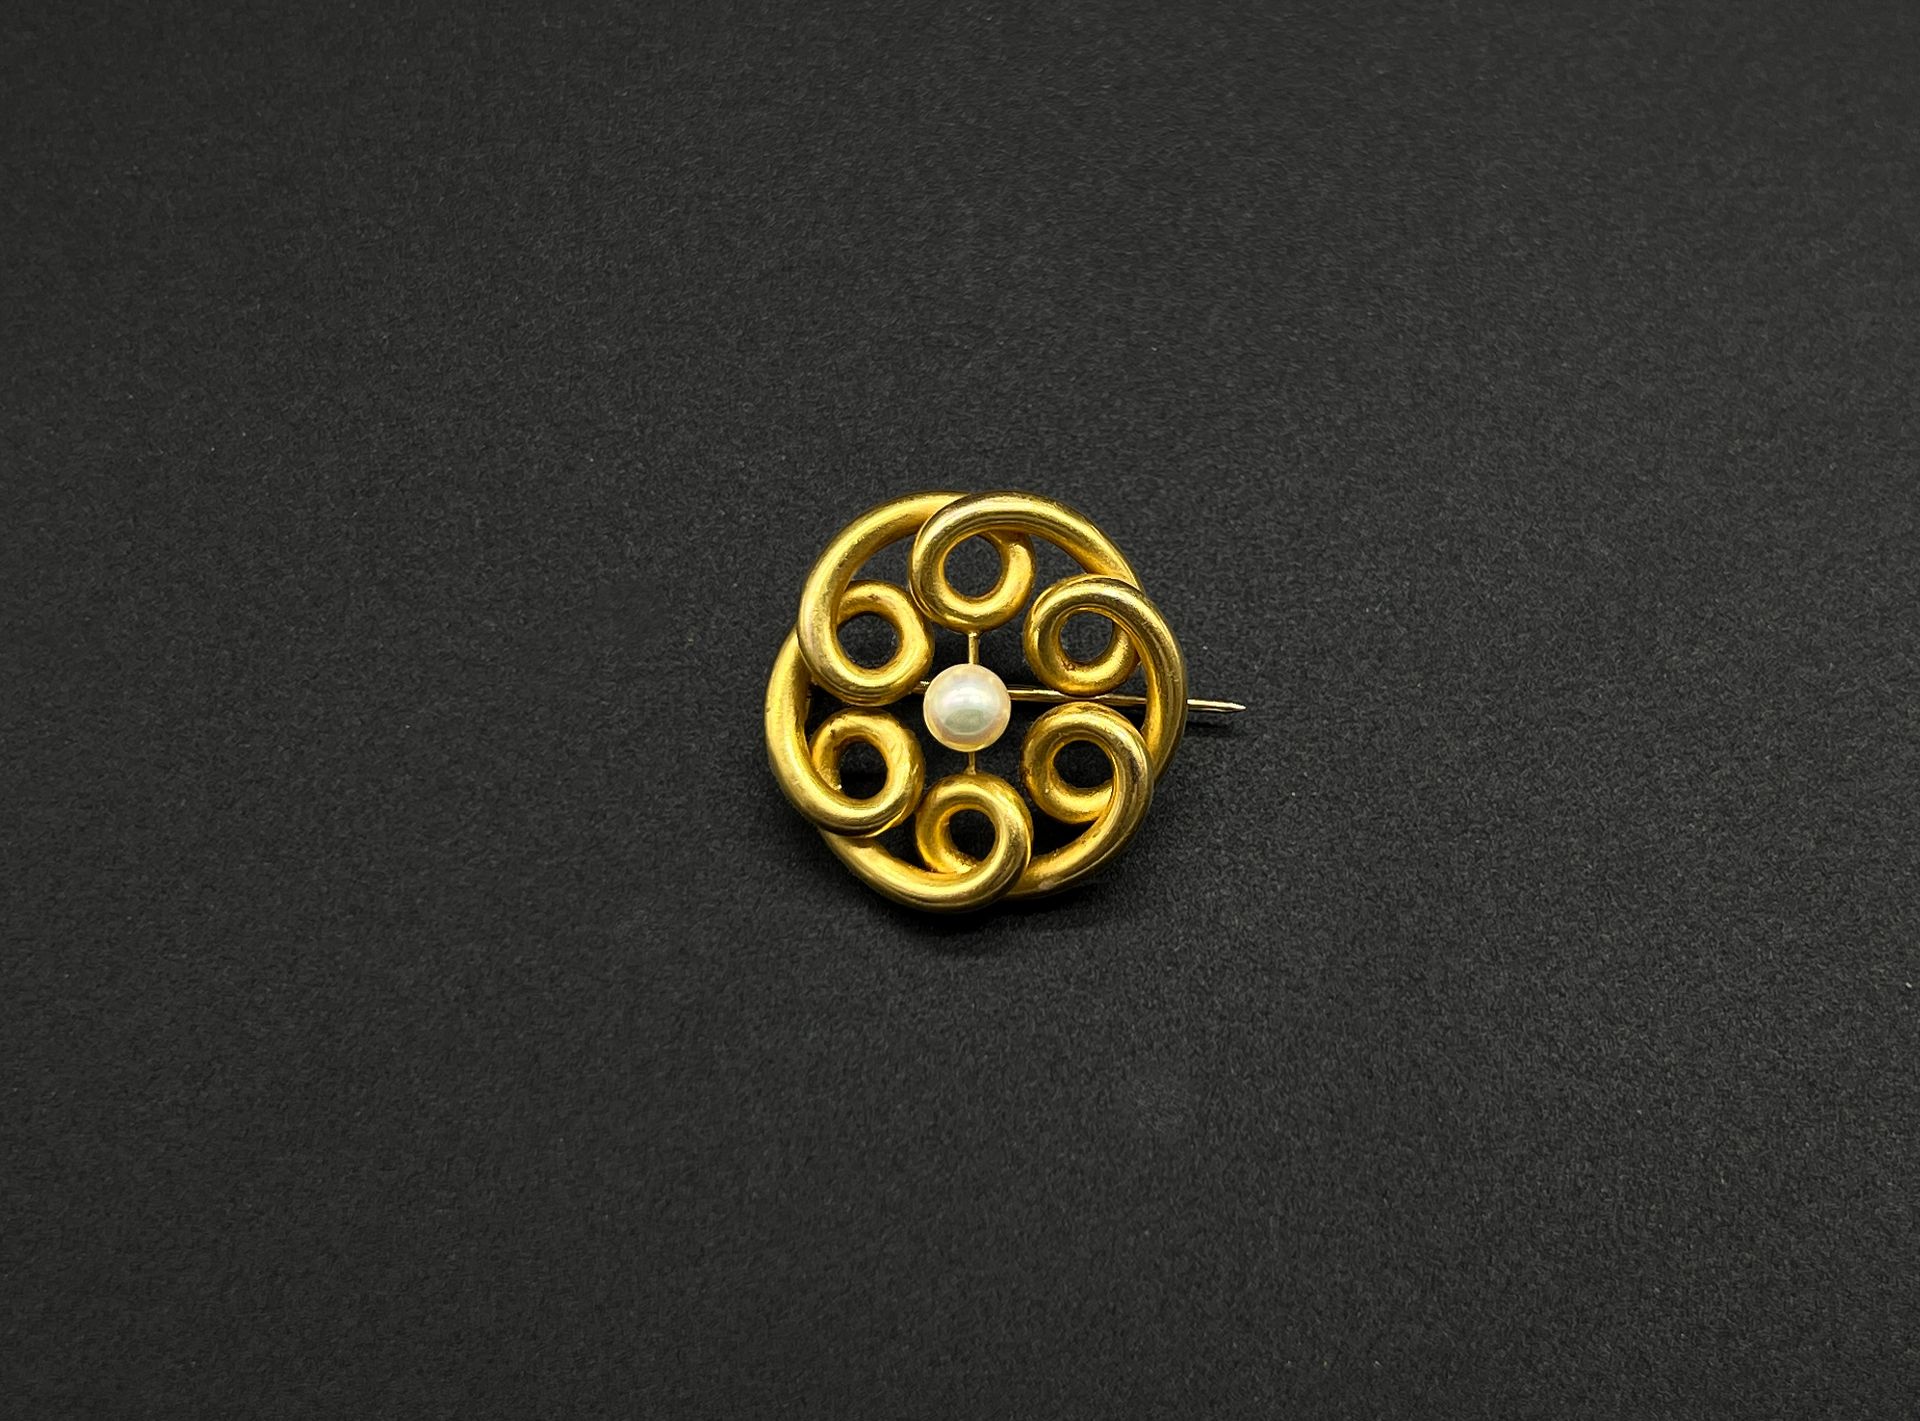 Null Yellow gold (750) brooch with swirling motifs centered on a cultured pearl.&hellip;